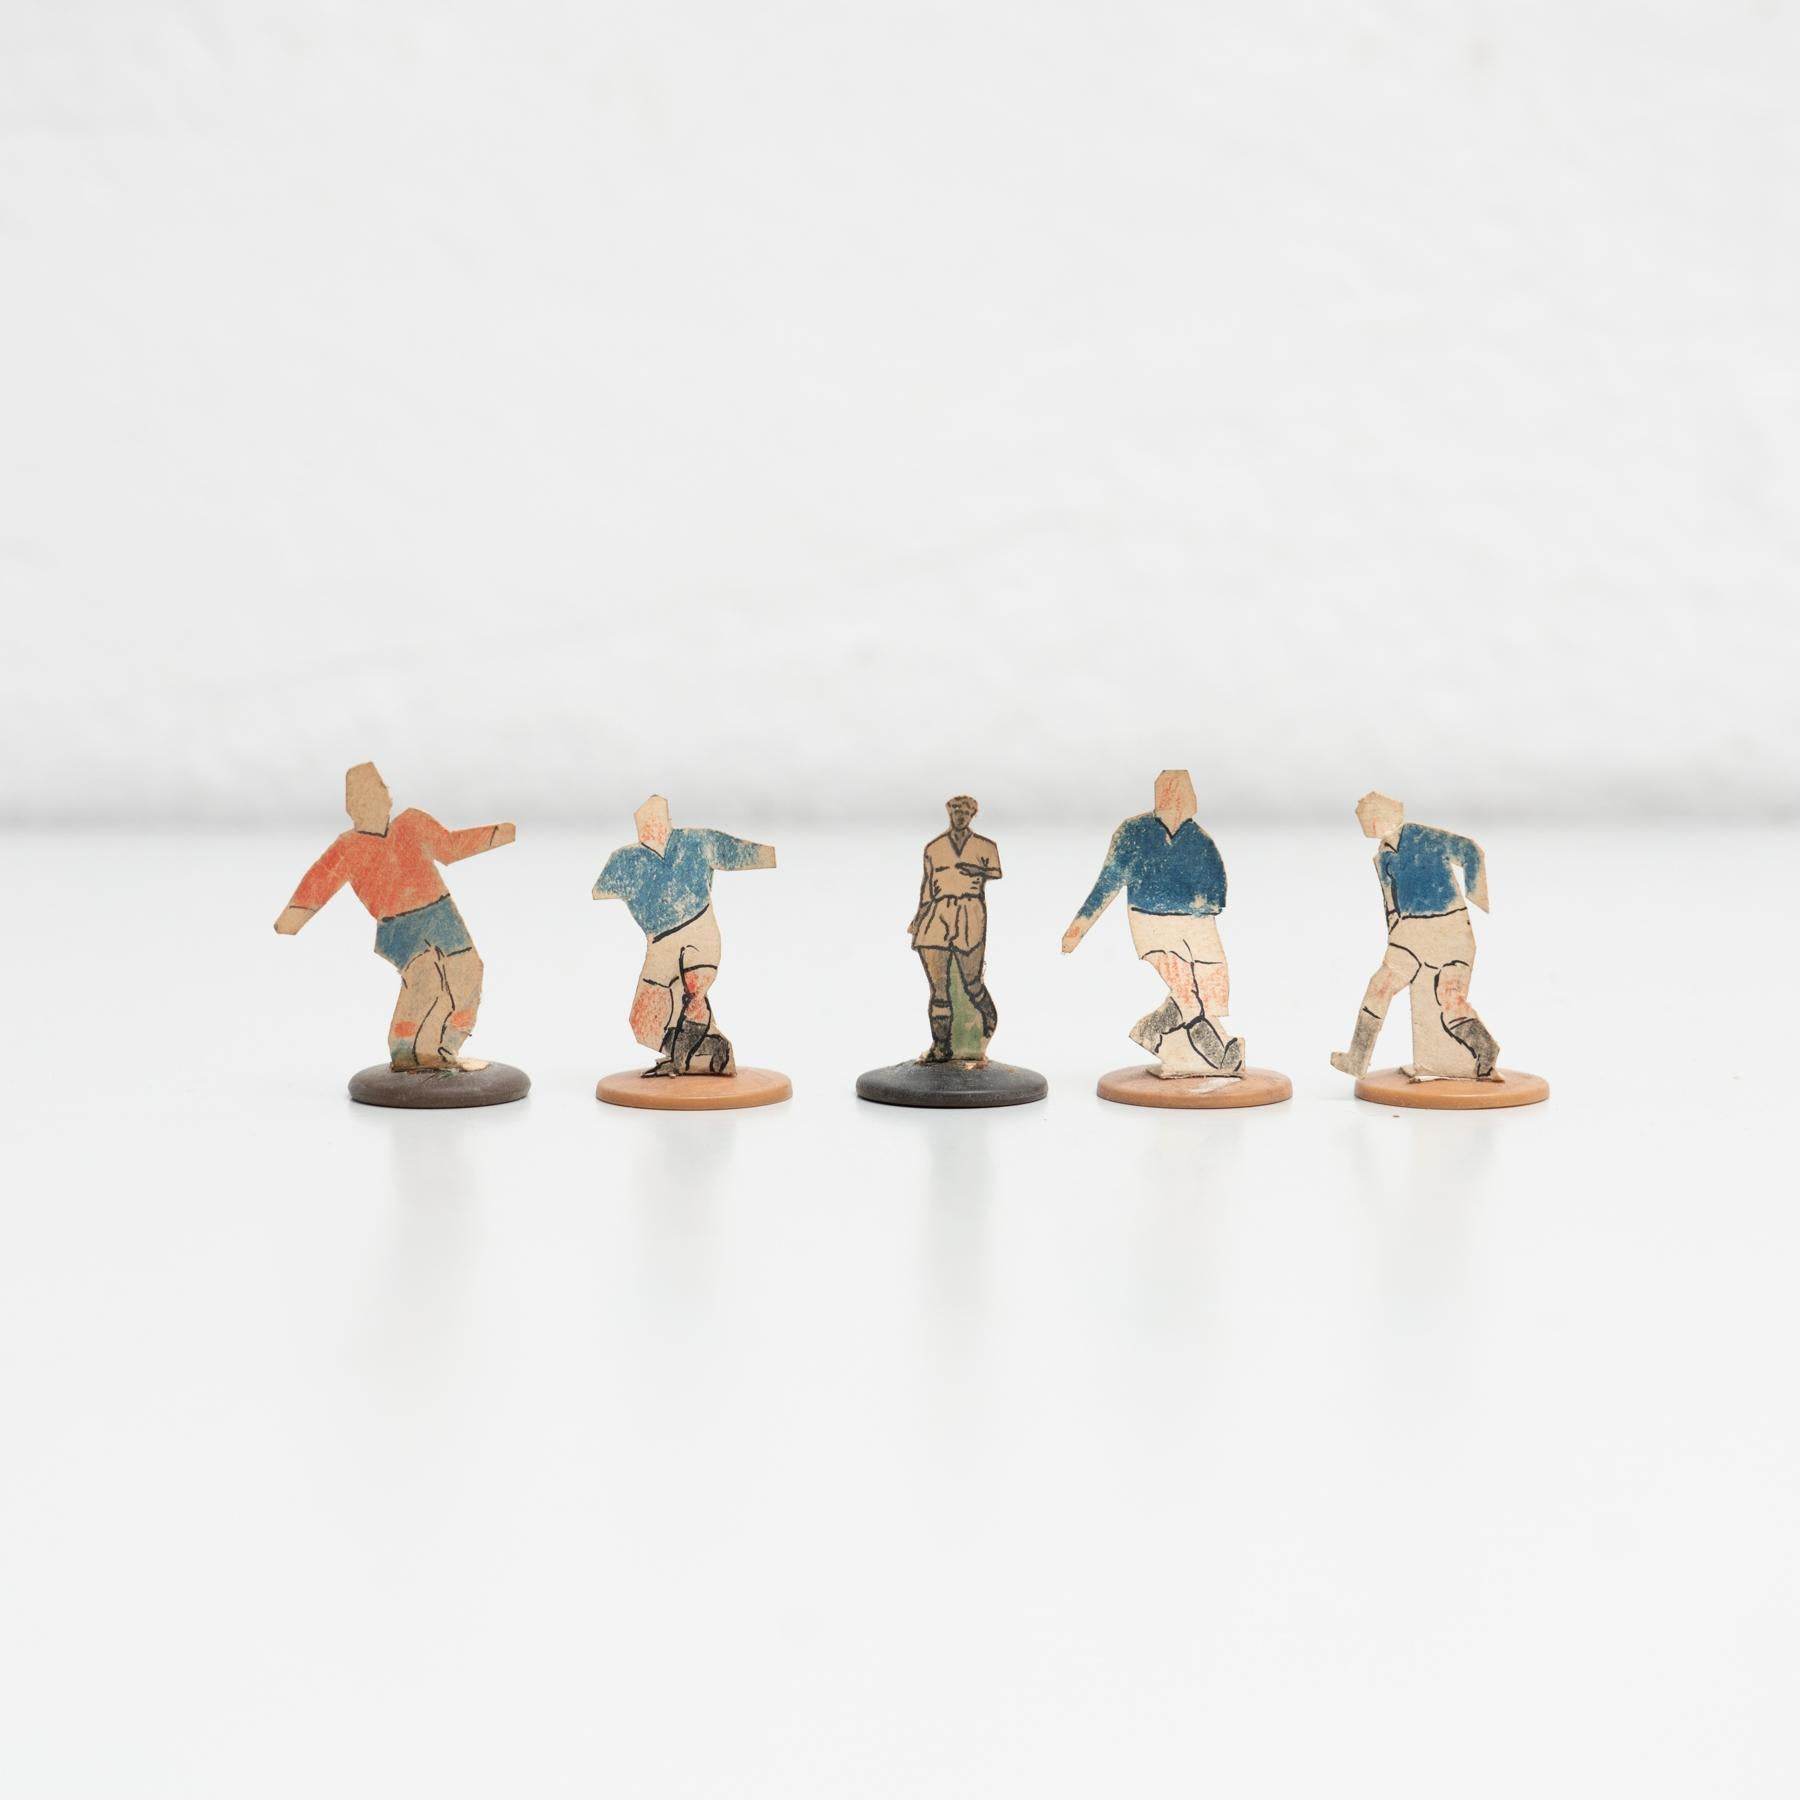 Mid-Century Modern Set of 5 Traditional Antique Button Soccer Game Figures, circa 1950 For Sale